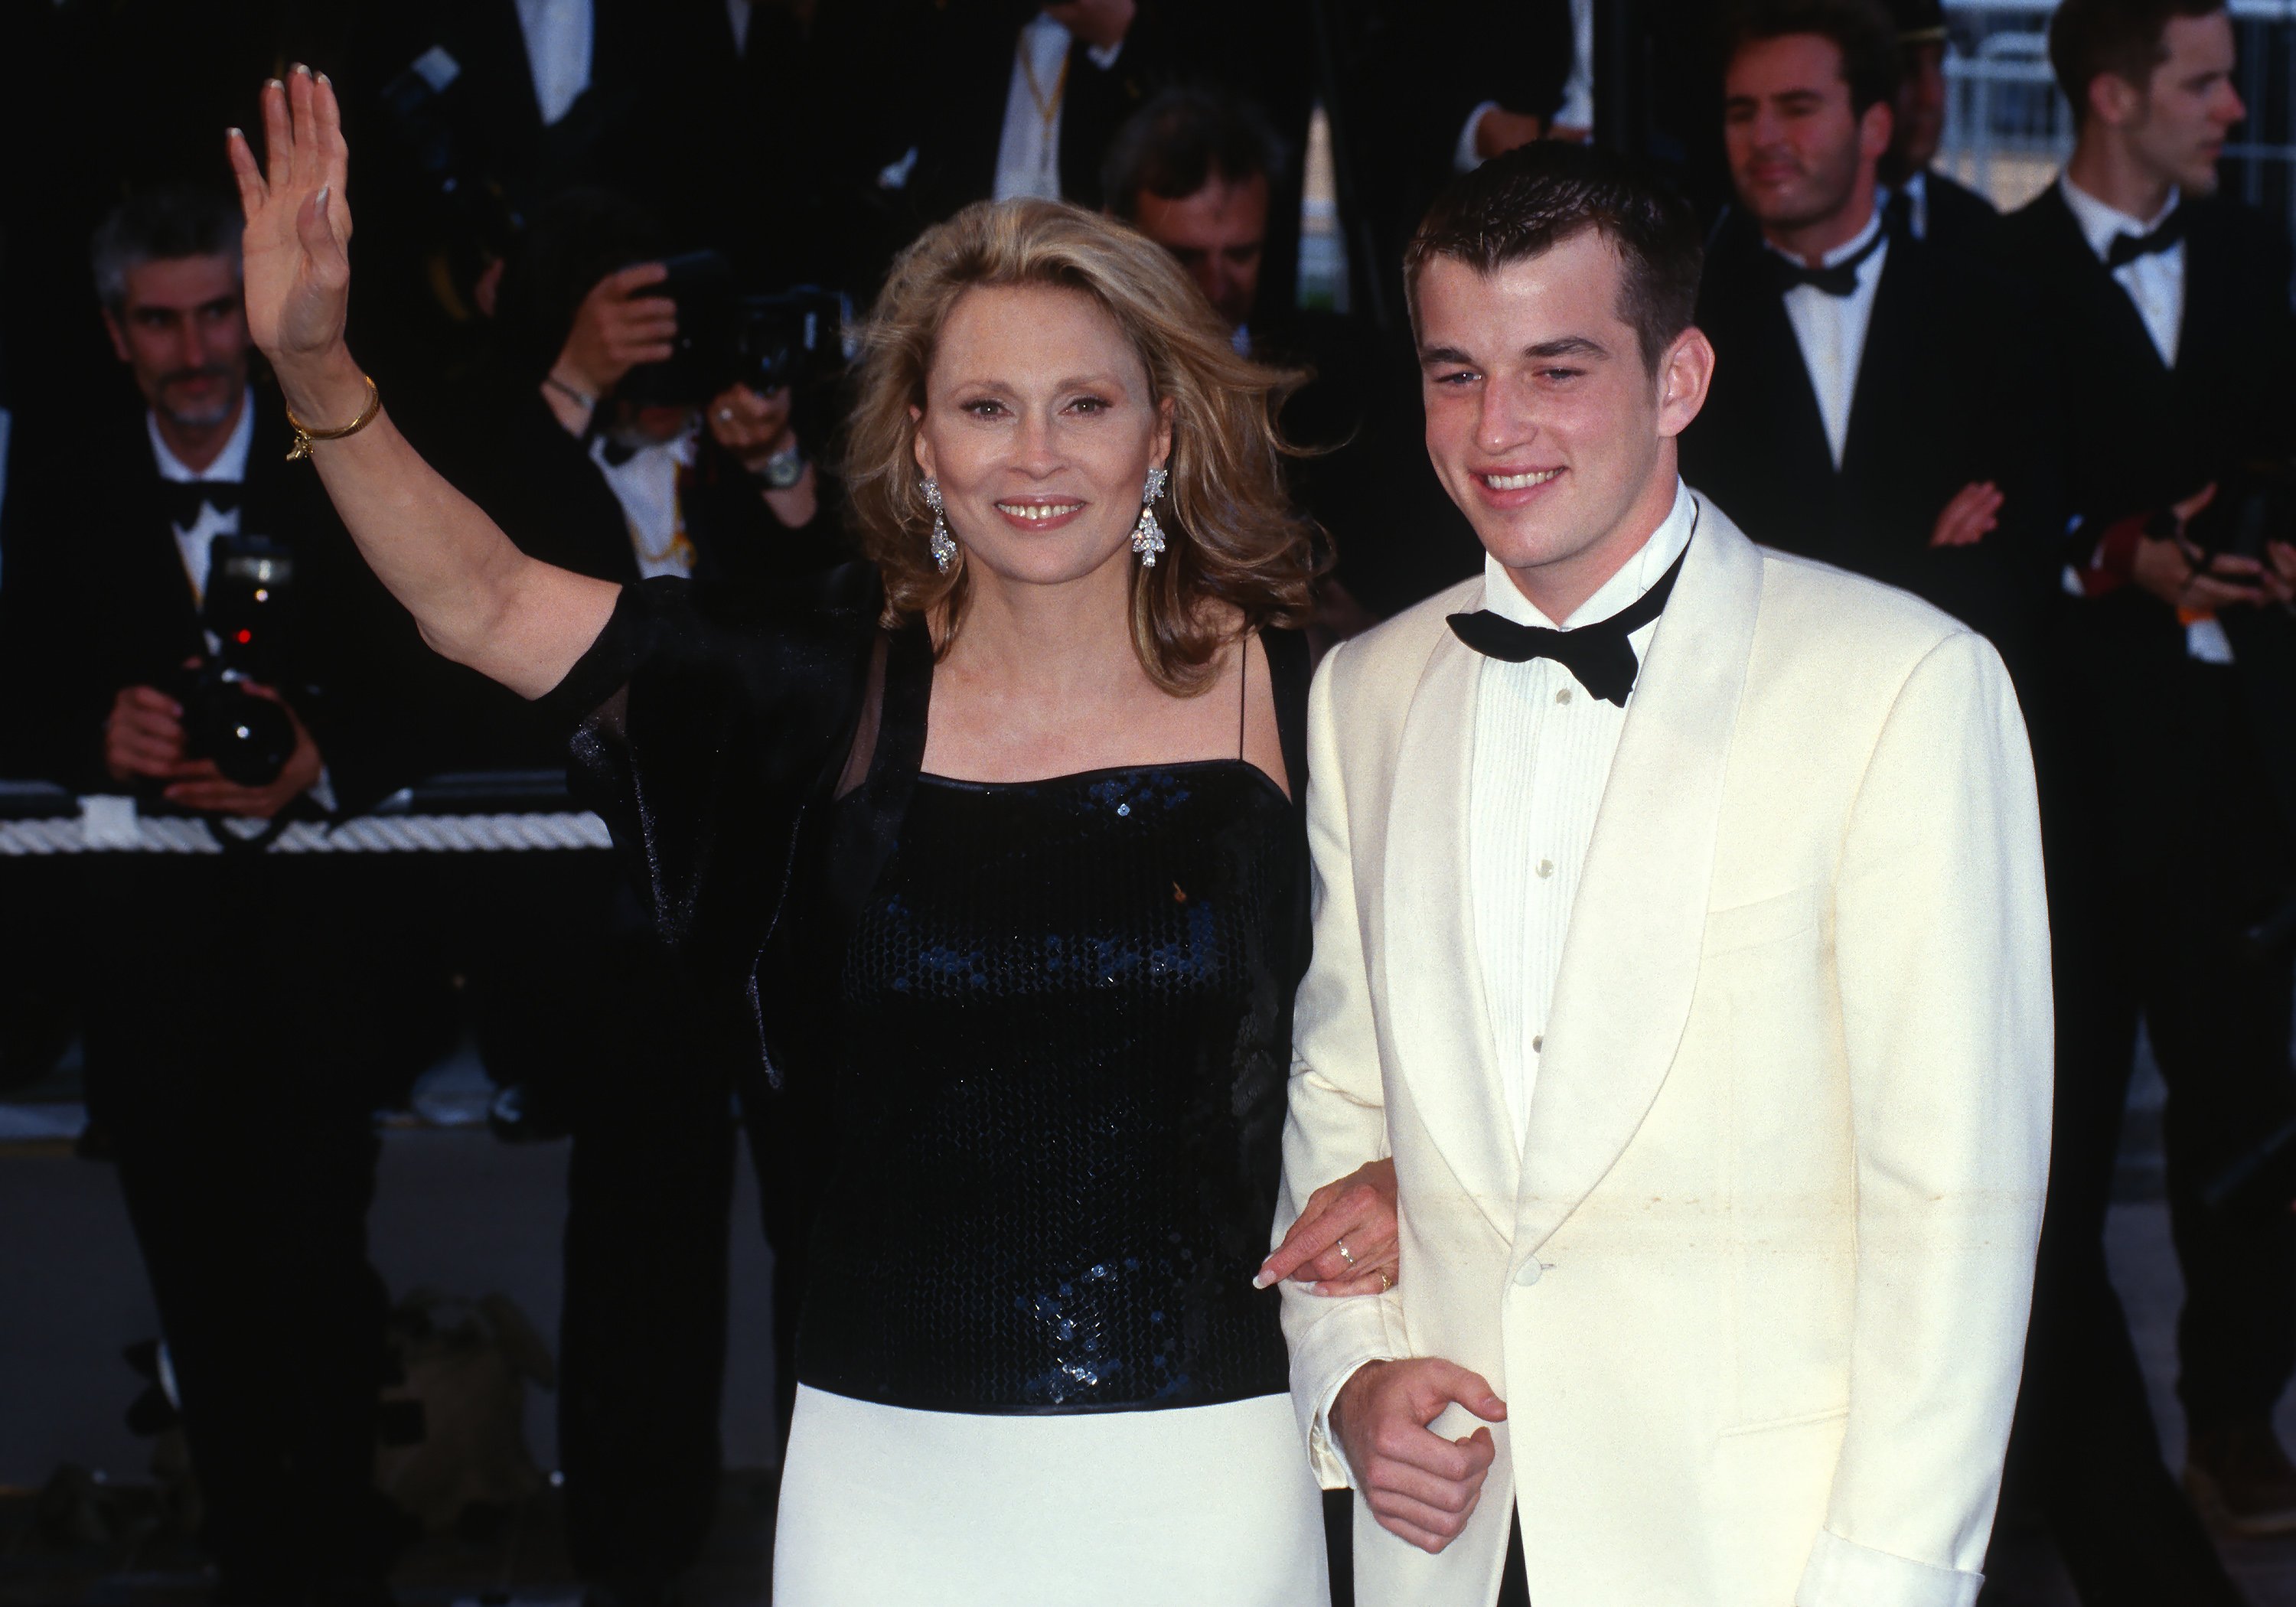 Faye Dunaway and her son Liam O'Neil attend the 52th Cannes Film Festival, 1999, Cannes, France. | Photo: Getty Images